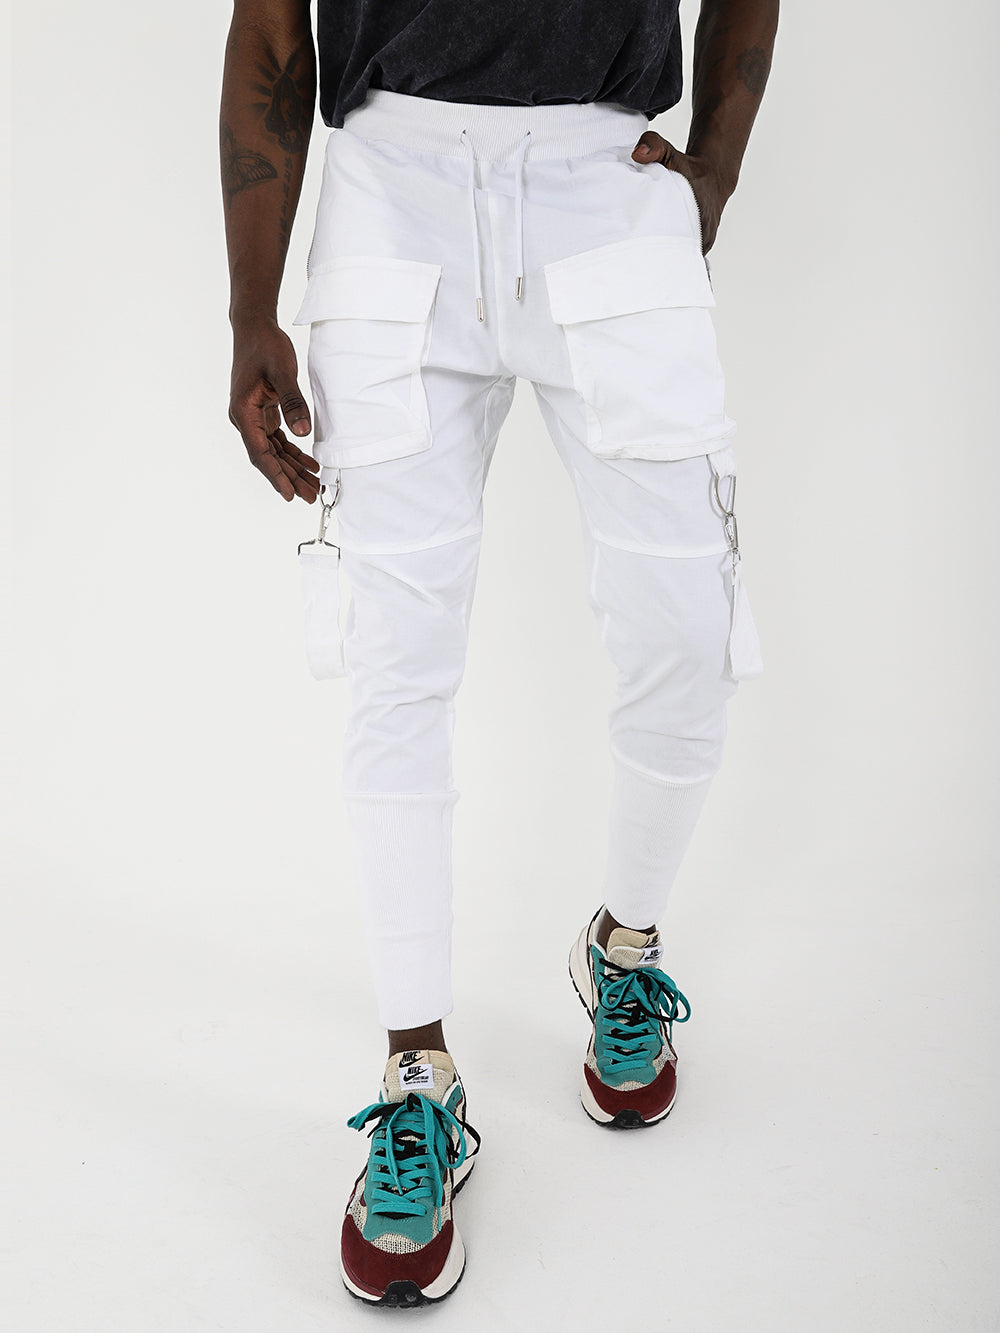 A man wearing BROOKLYN JOGGERS with adjustable drawstring waist and sneakers.